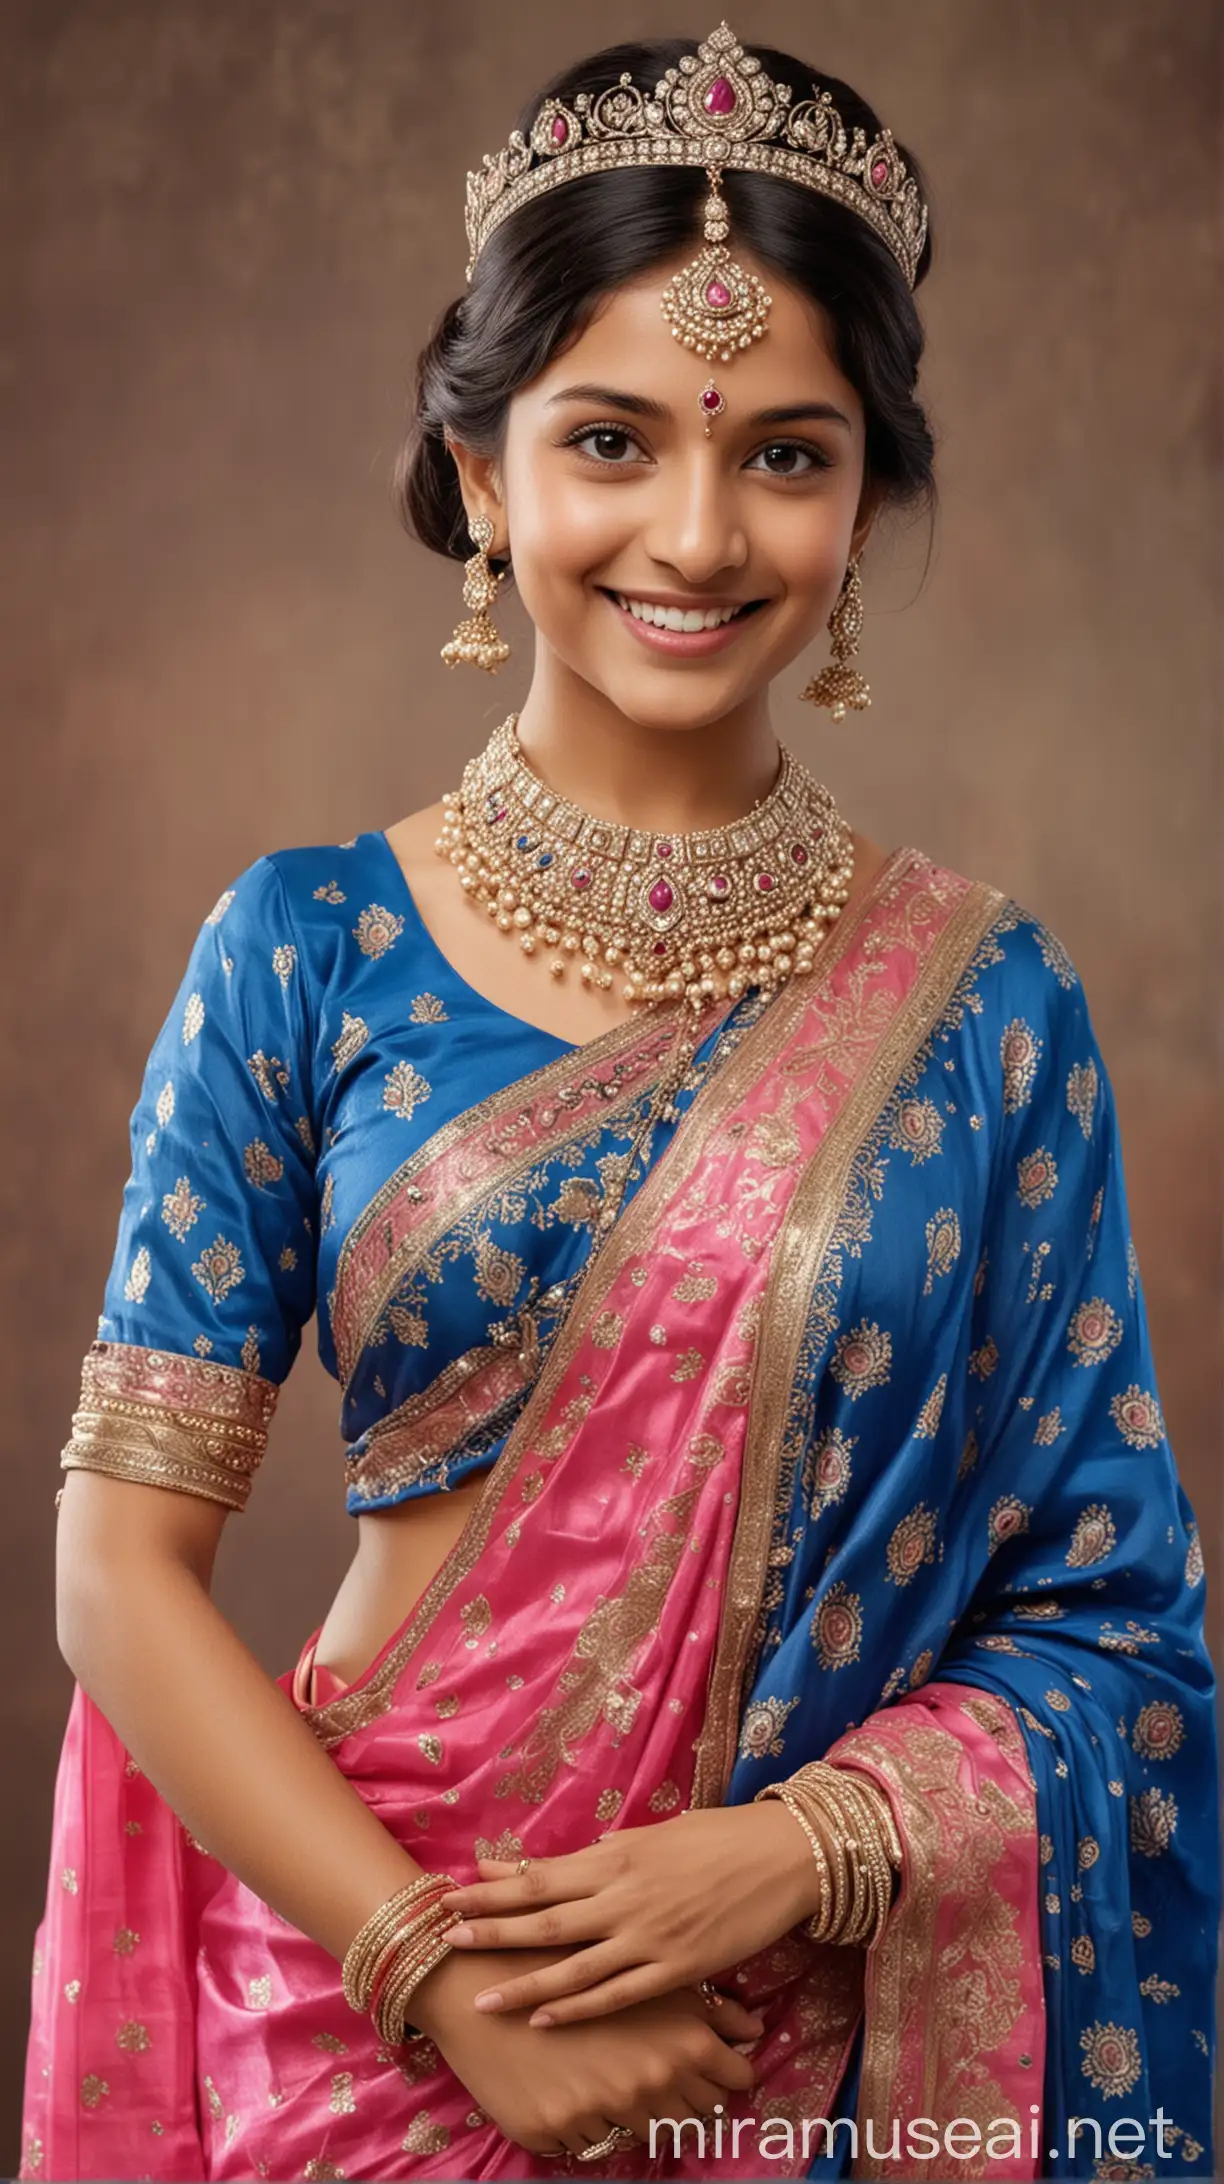 Smiling Indian Princess in Blue and Pink Saree with Ornaments and Crown